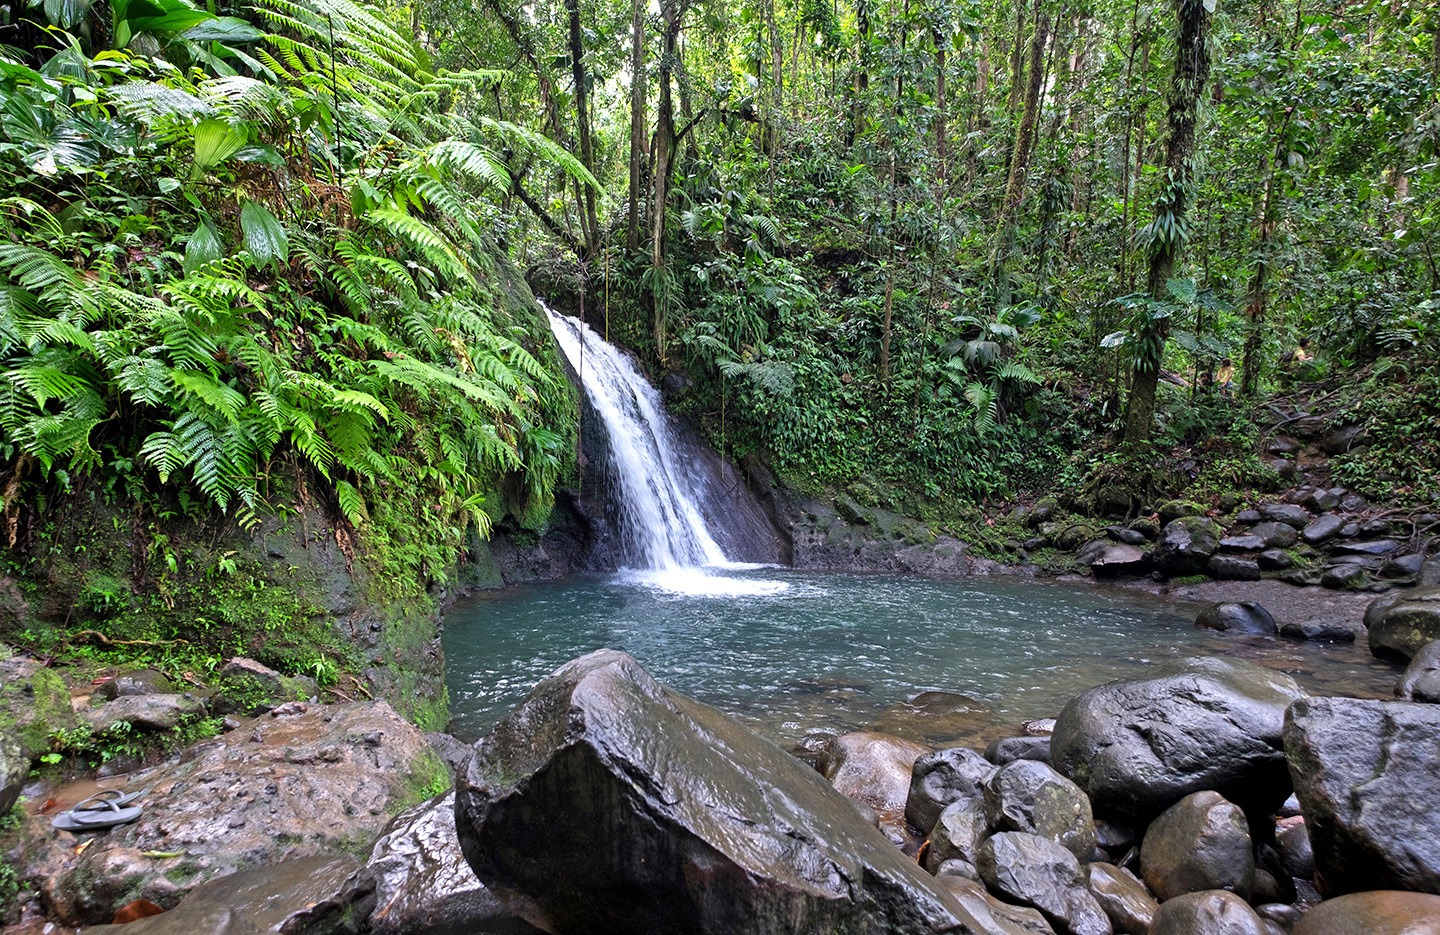 The Cascade aux Ecrevisses waterfall in Basse-Terre